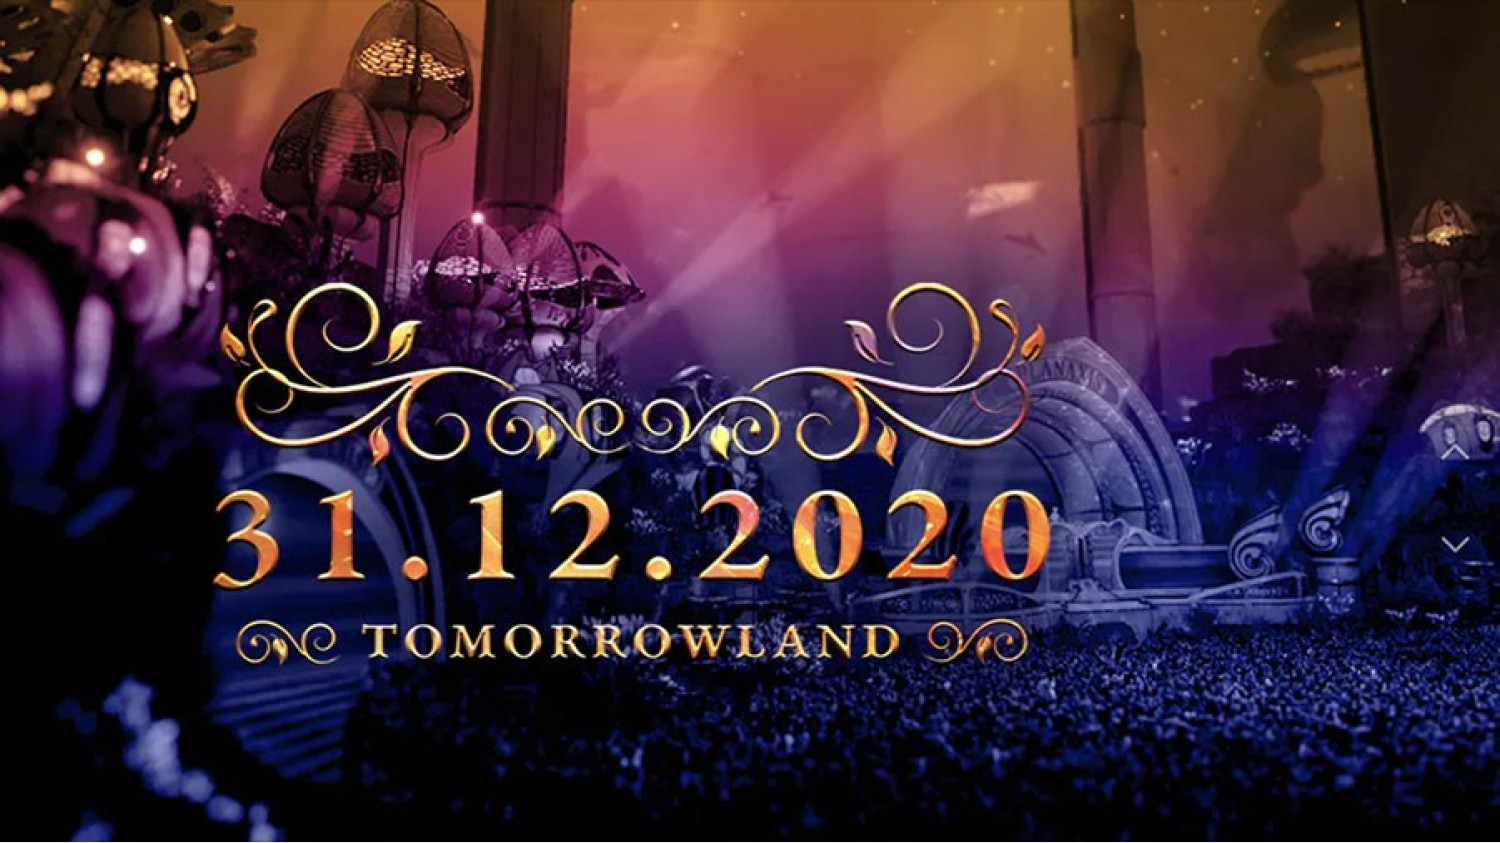 Party nieuws: Must See! Tomorrowland 31.12.2020 Official Aftermovie